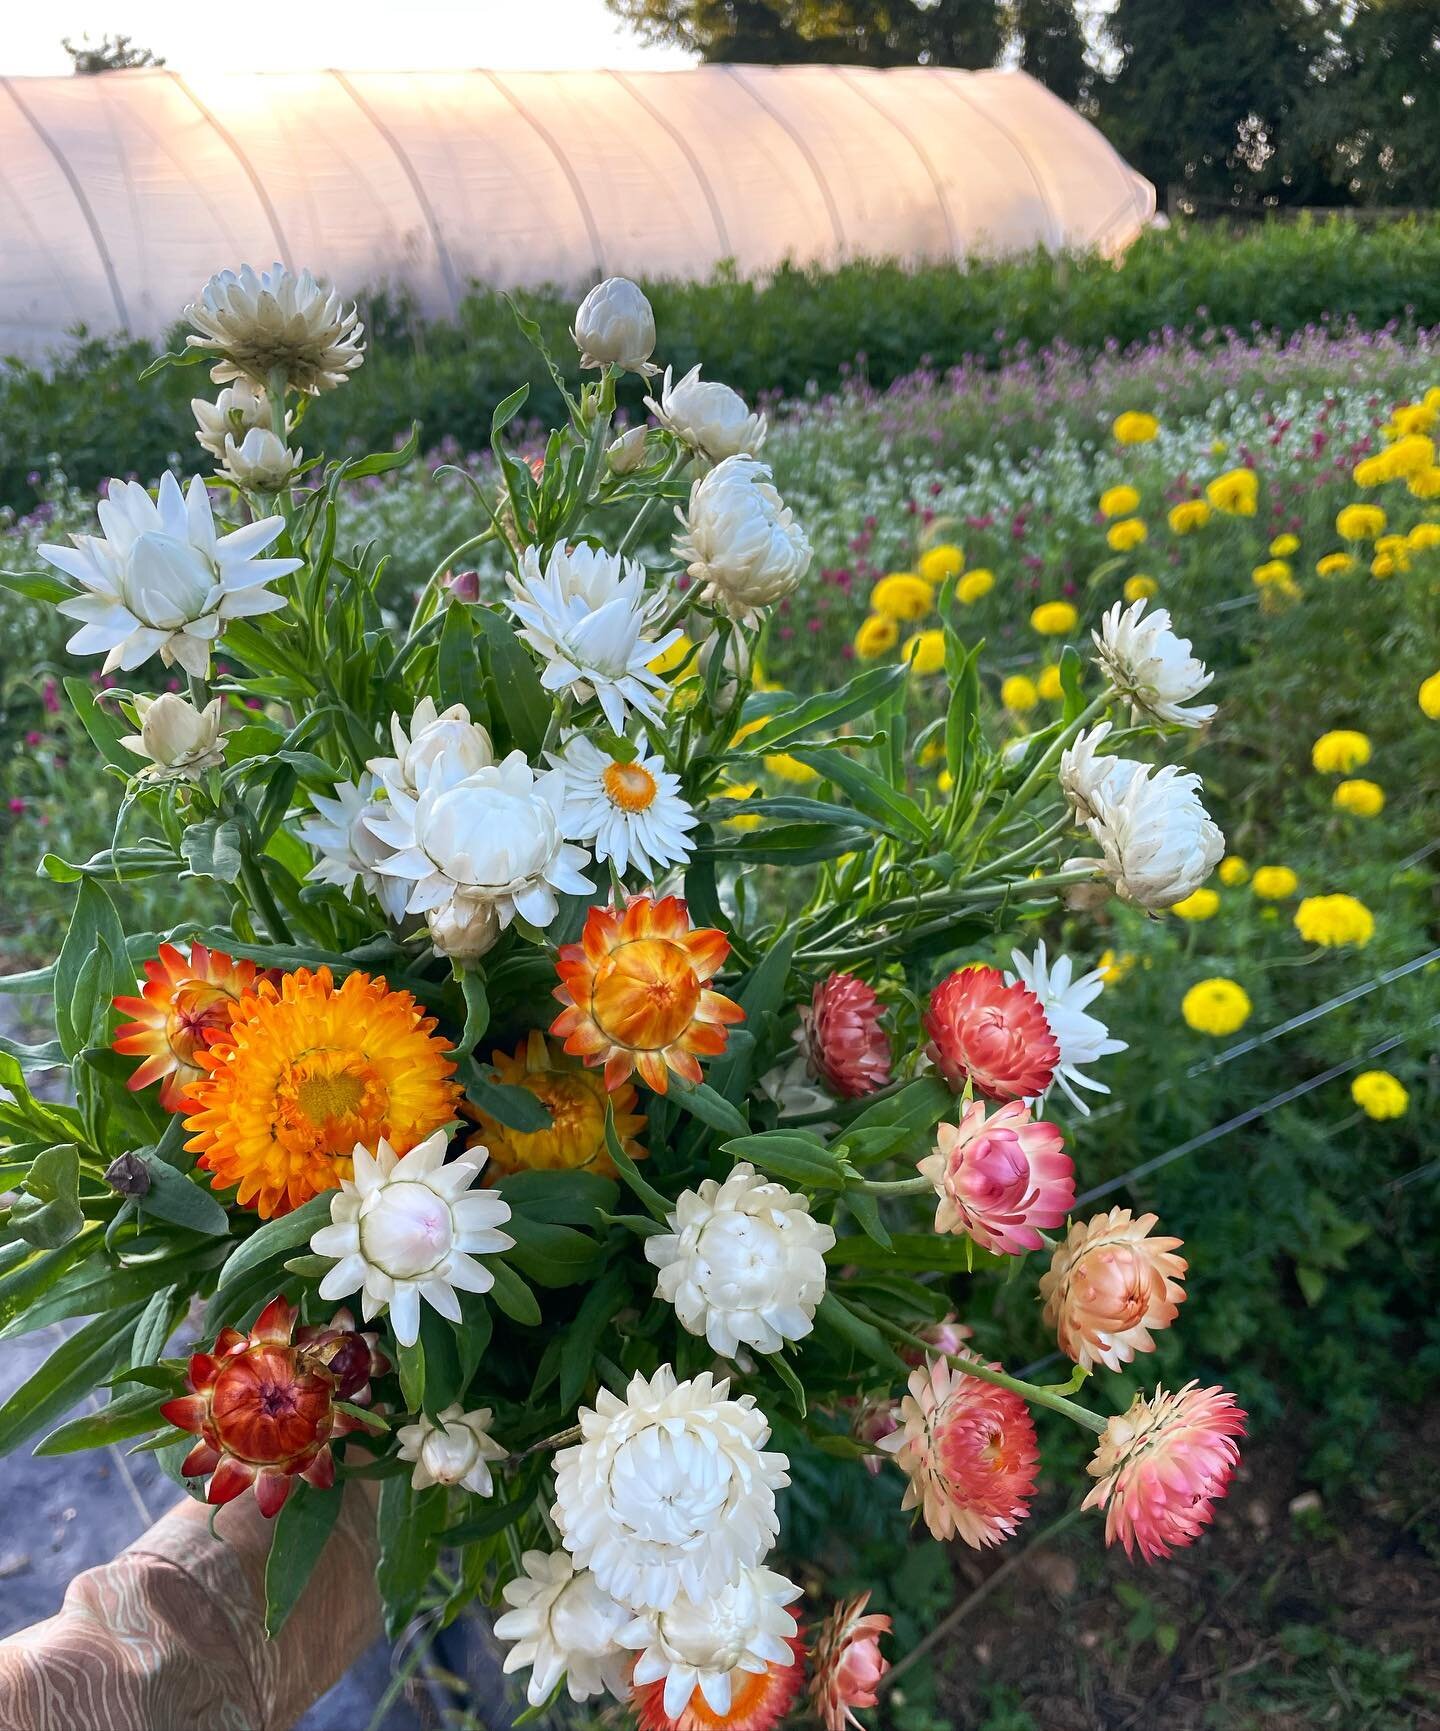 The flowers are MAGIC right now. Order for local delivery at the link in our profile 🧡💛🧡

#flowerfarmer #localflowers #dmv #baltimore